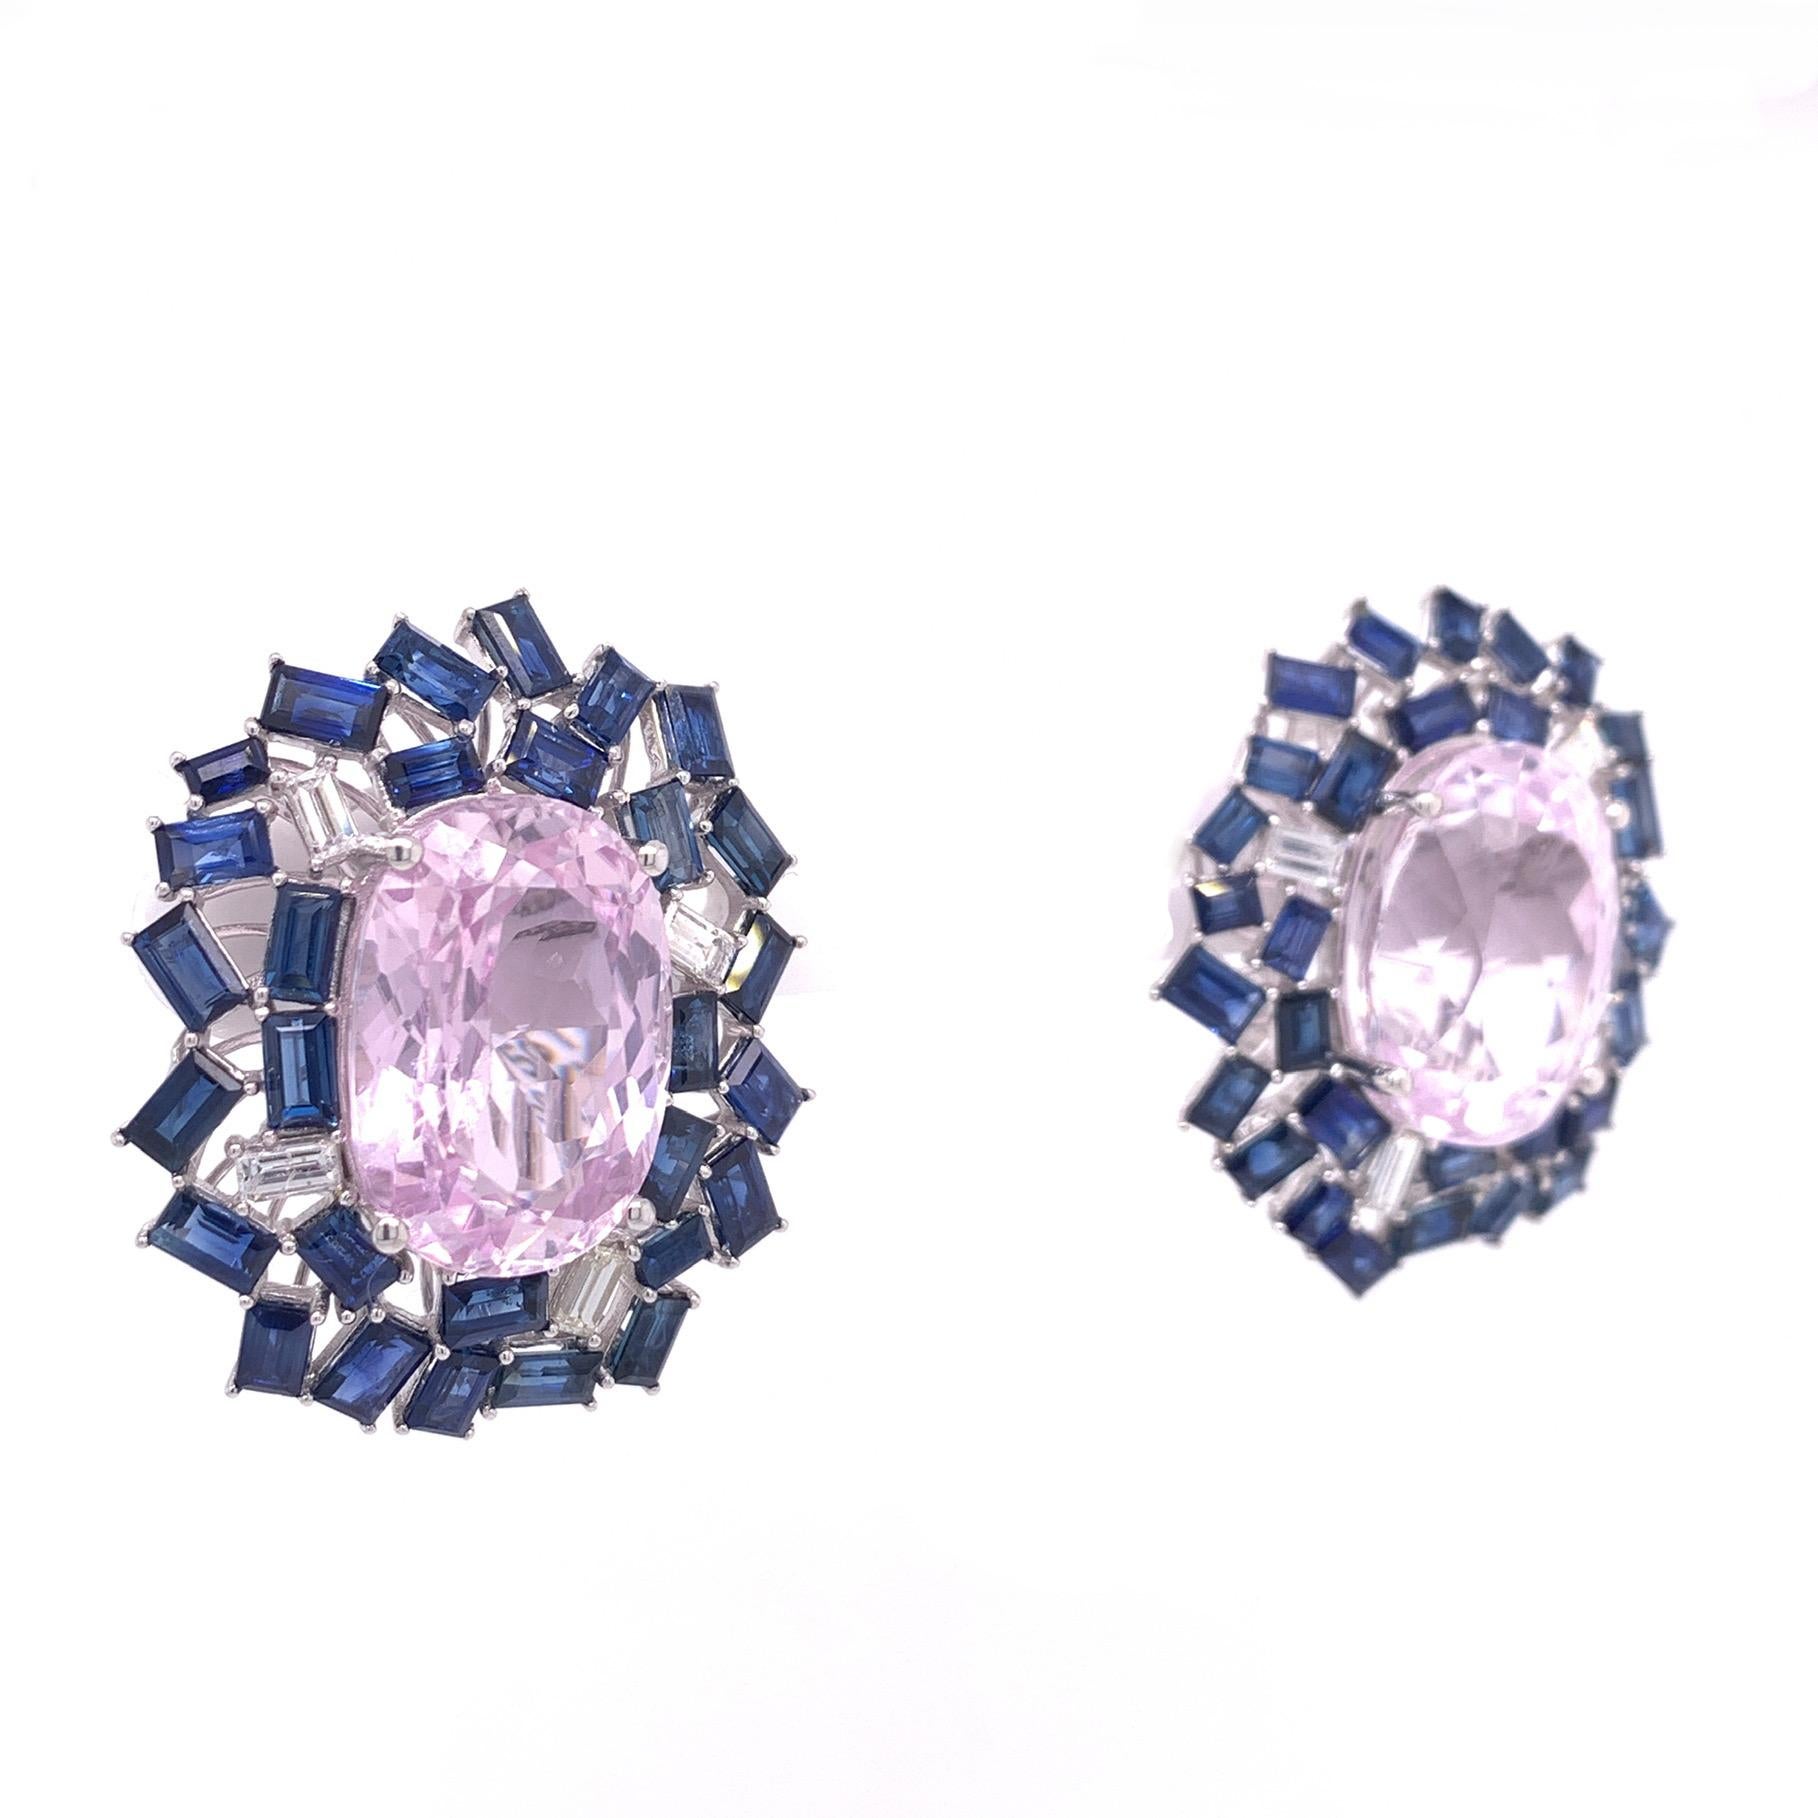 Midnight Blue Collection

Oval shape pink Kunzite with blue Sapphire and Diamond baguette earrings. 

Kunzite: 22.23ct total weight.
Blue Sapphire: 8.17ct total weight.
Diamonds: 0.62ct total weight.
All diamonds are G-H/SI stones.